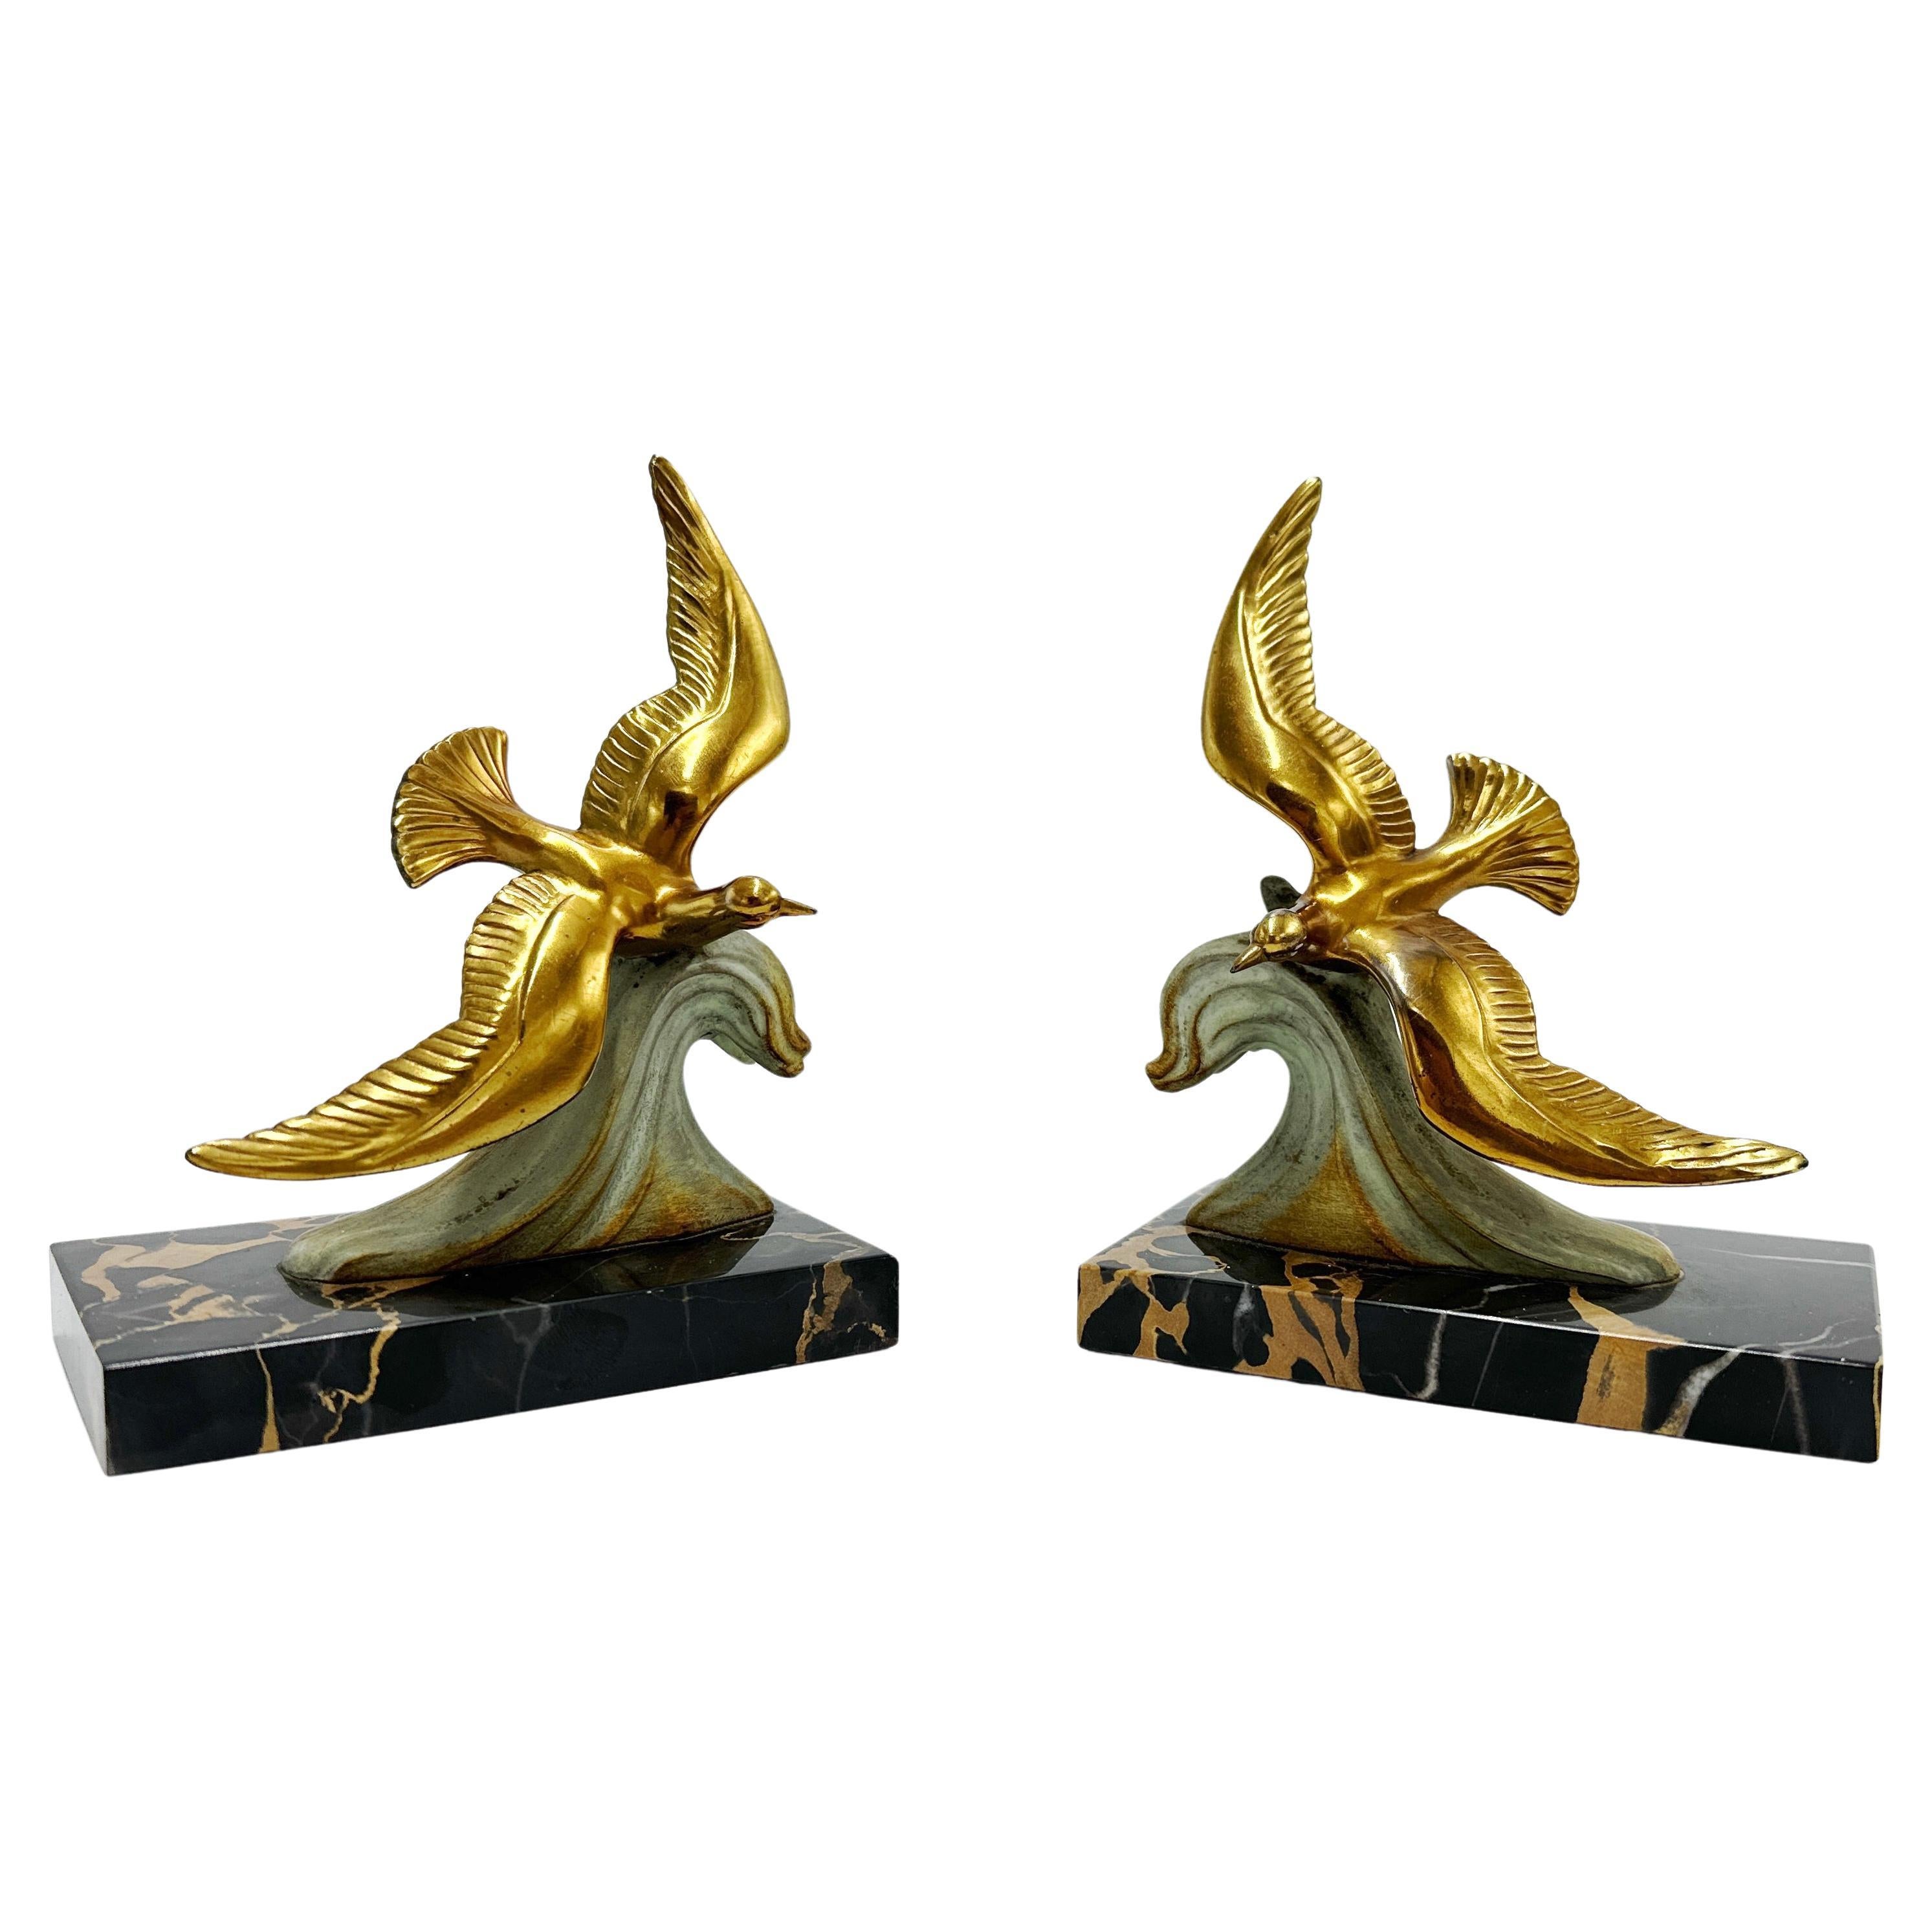 French Art Deco Spelter Brass and Marble Bookends